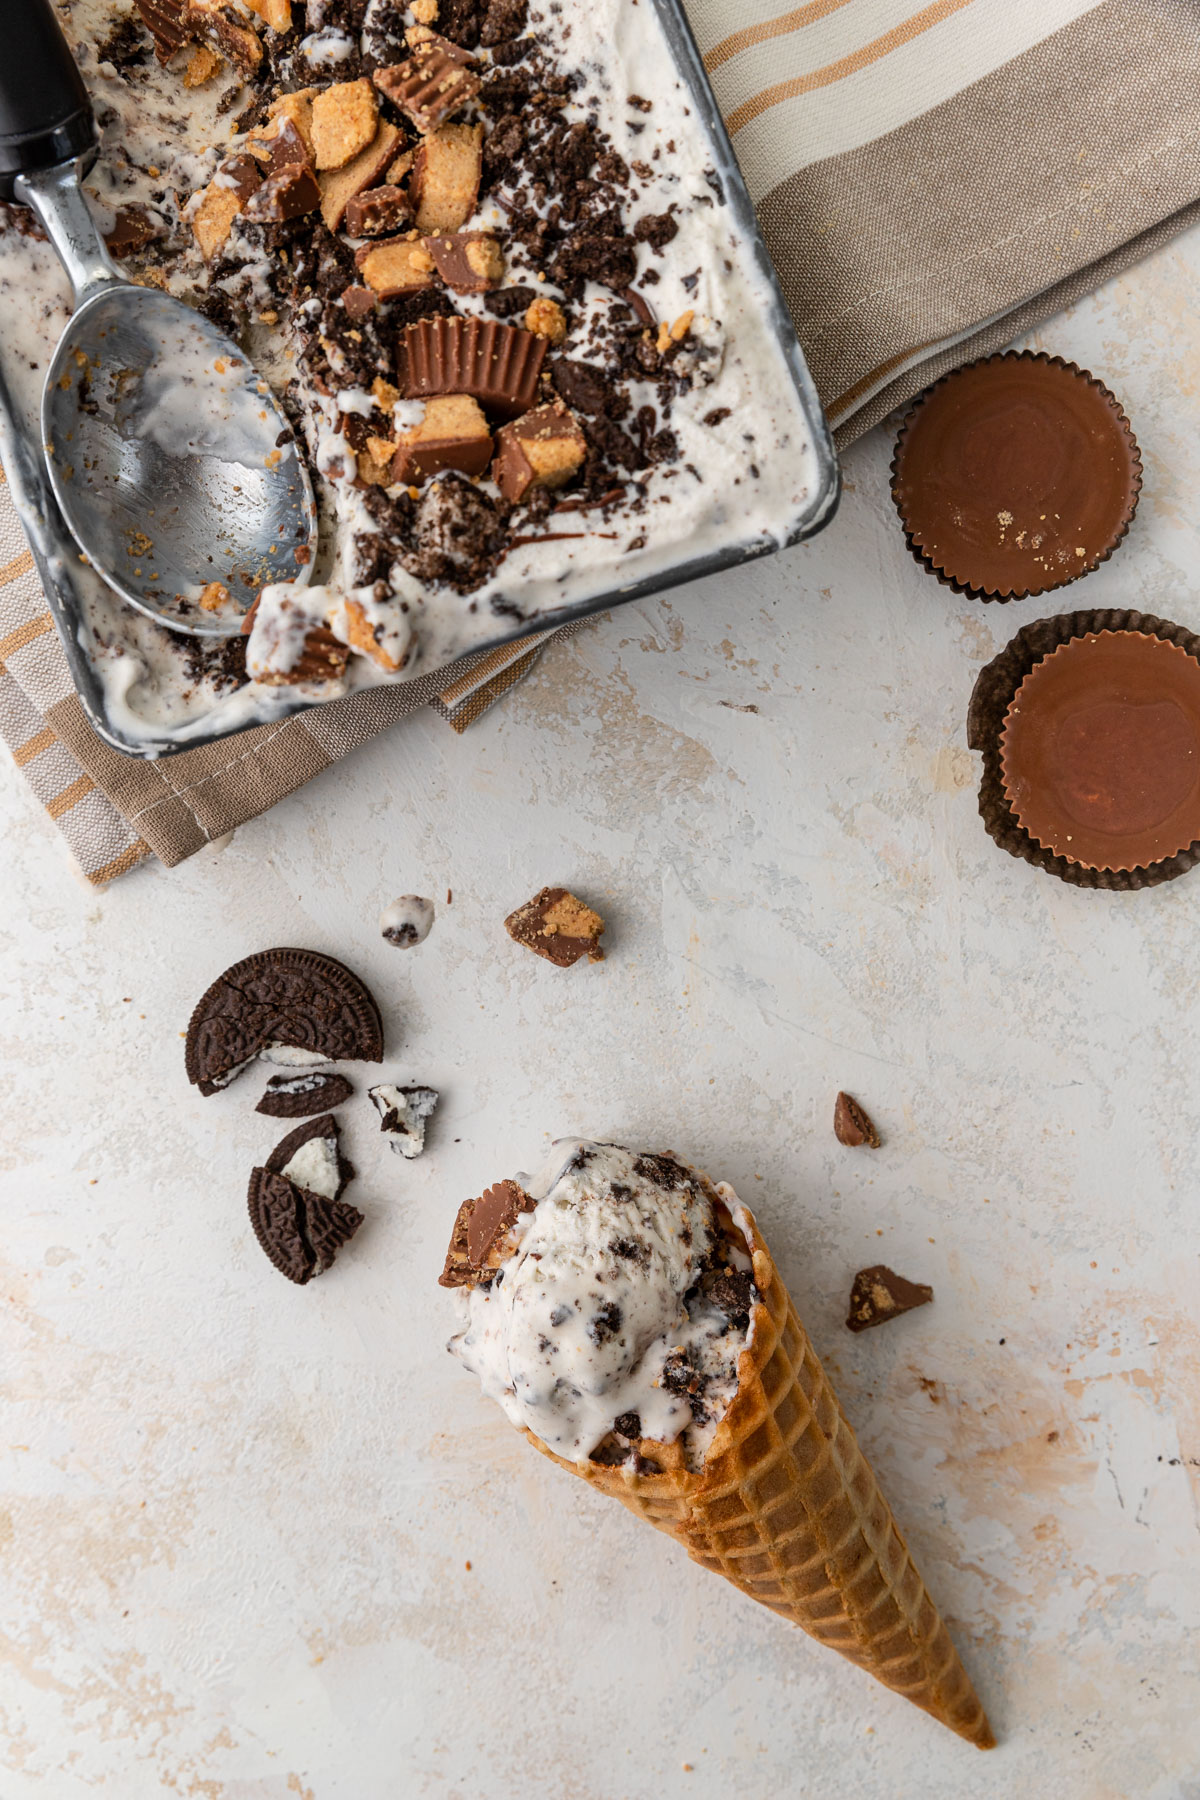 ice cream cone with oreo ice cream with broken oreo and reese's pieces on background.